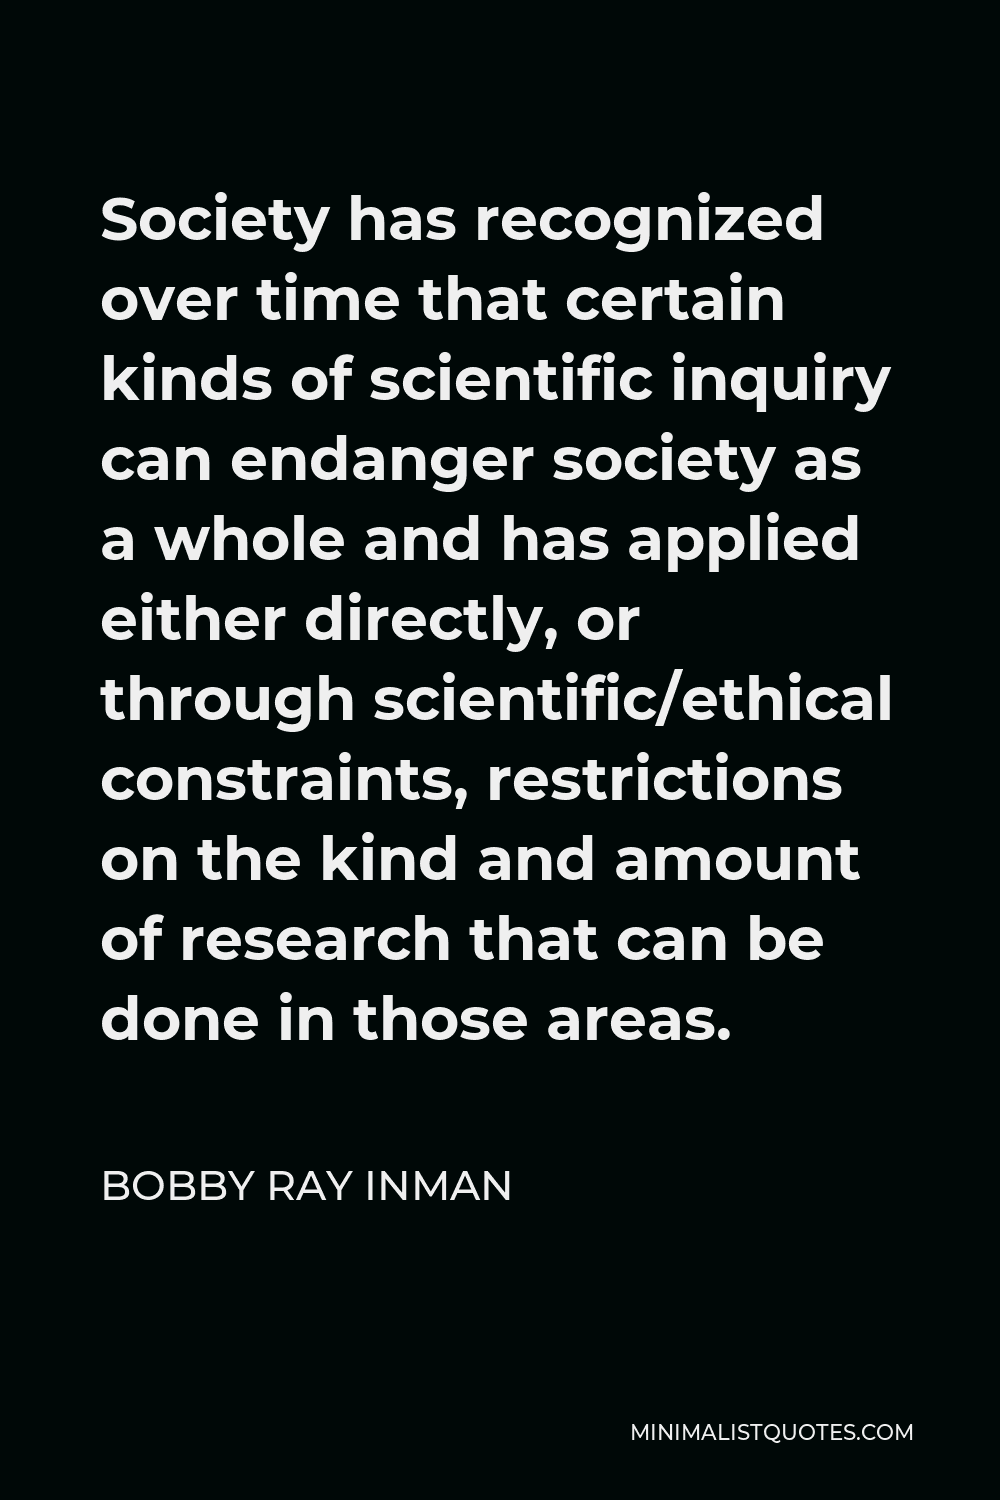 Bobby Ray Inman Quote - Society has recognized over time that certain kinds of scientific inquiry can endanger society as a whole and has applied either directly, or through scientific/ethical constraints, restrictions on the kind and amount of research that can be done in those areas.